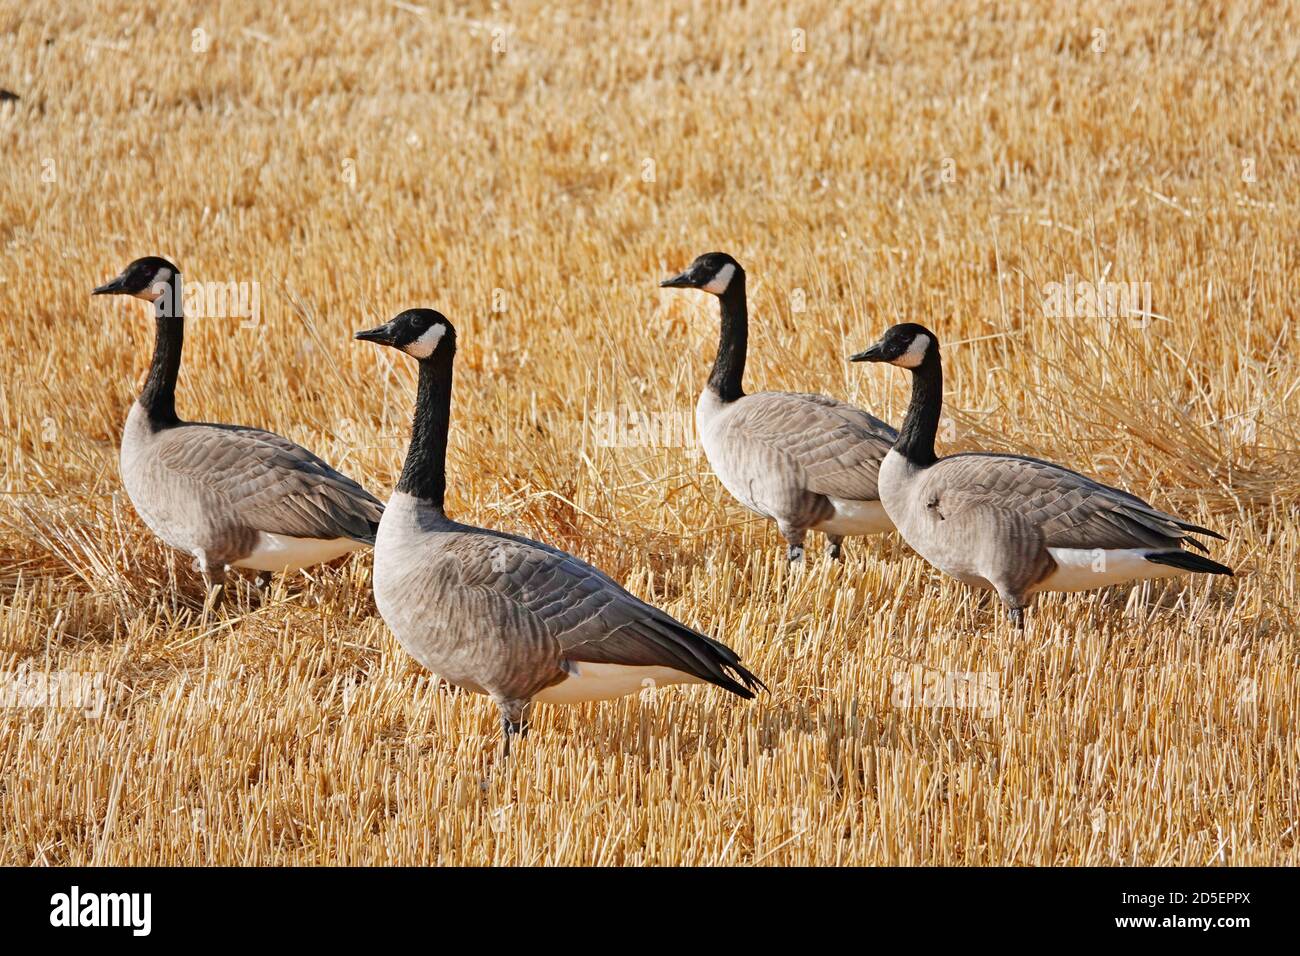 A flock of Canada geese in a wheat field near the city of Bend, in central Oregon. Stock Photo